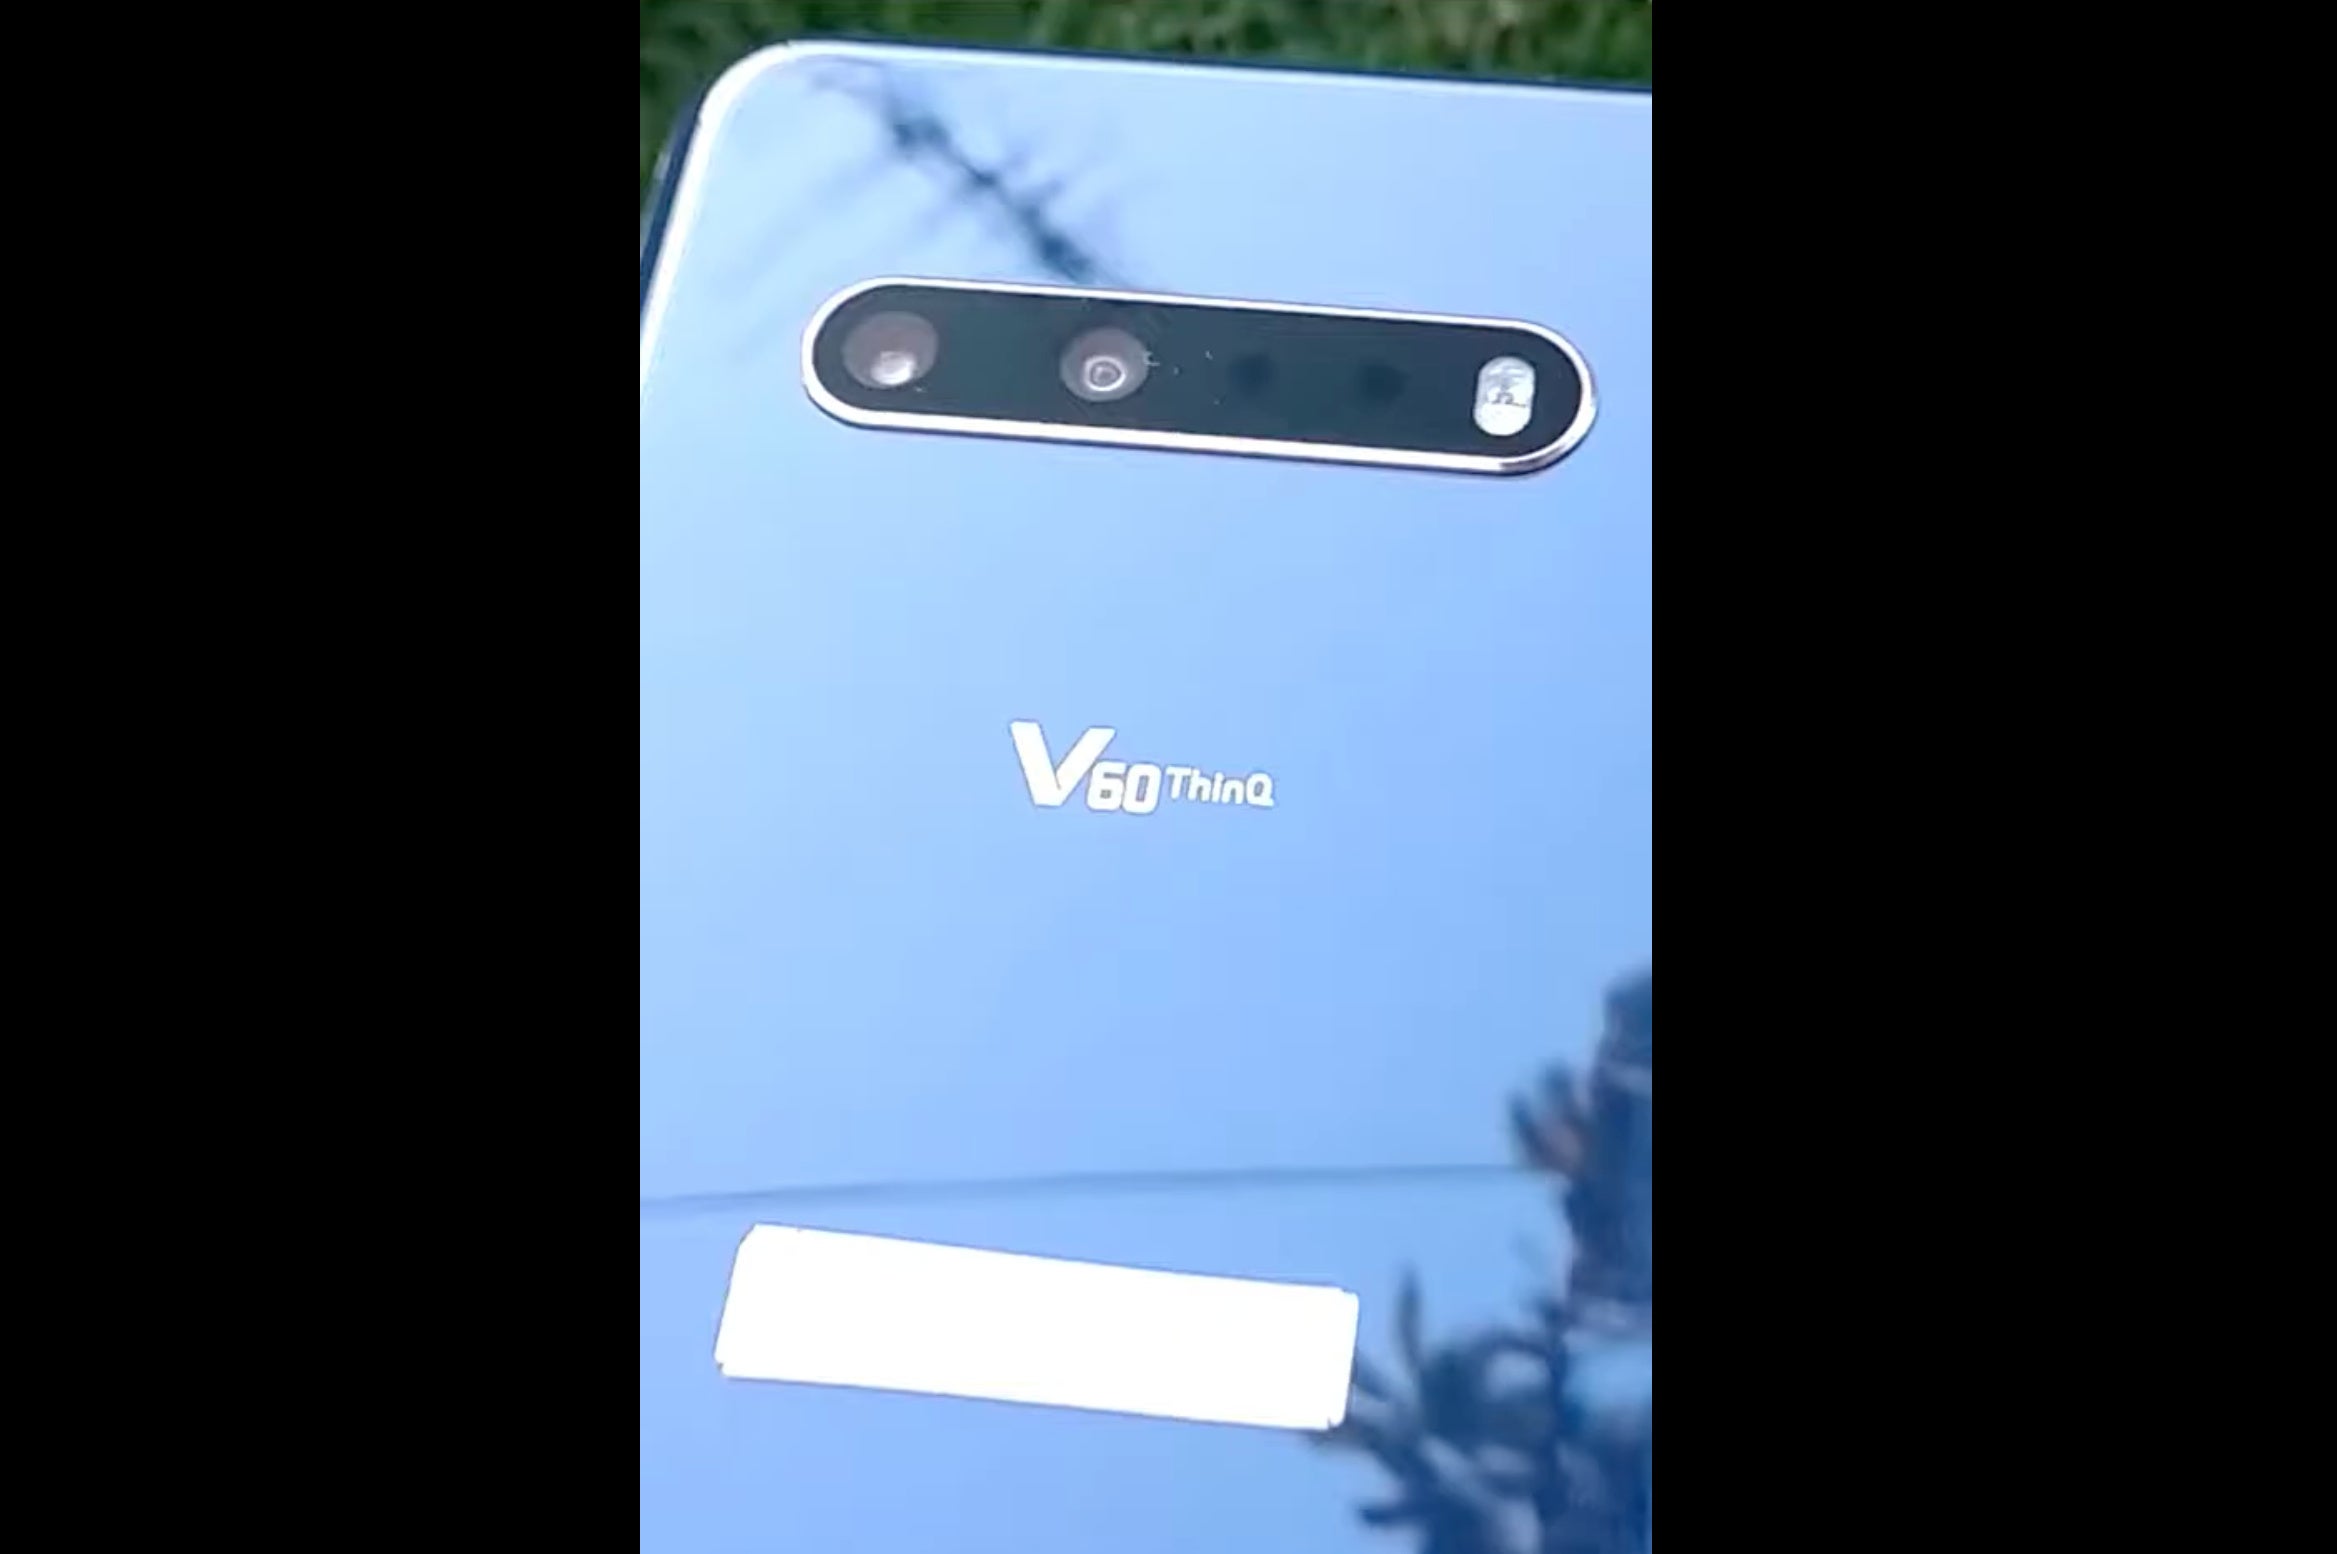 LG V60 leaks in the flesh and what is up with those cameras?